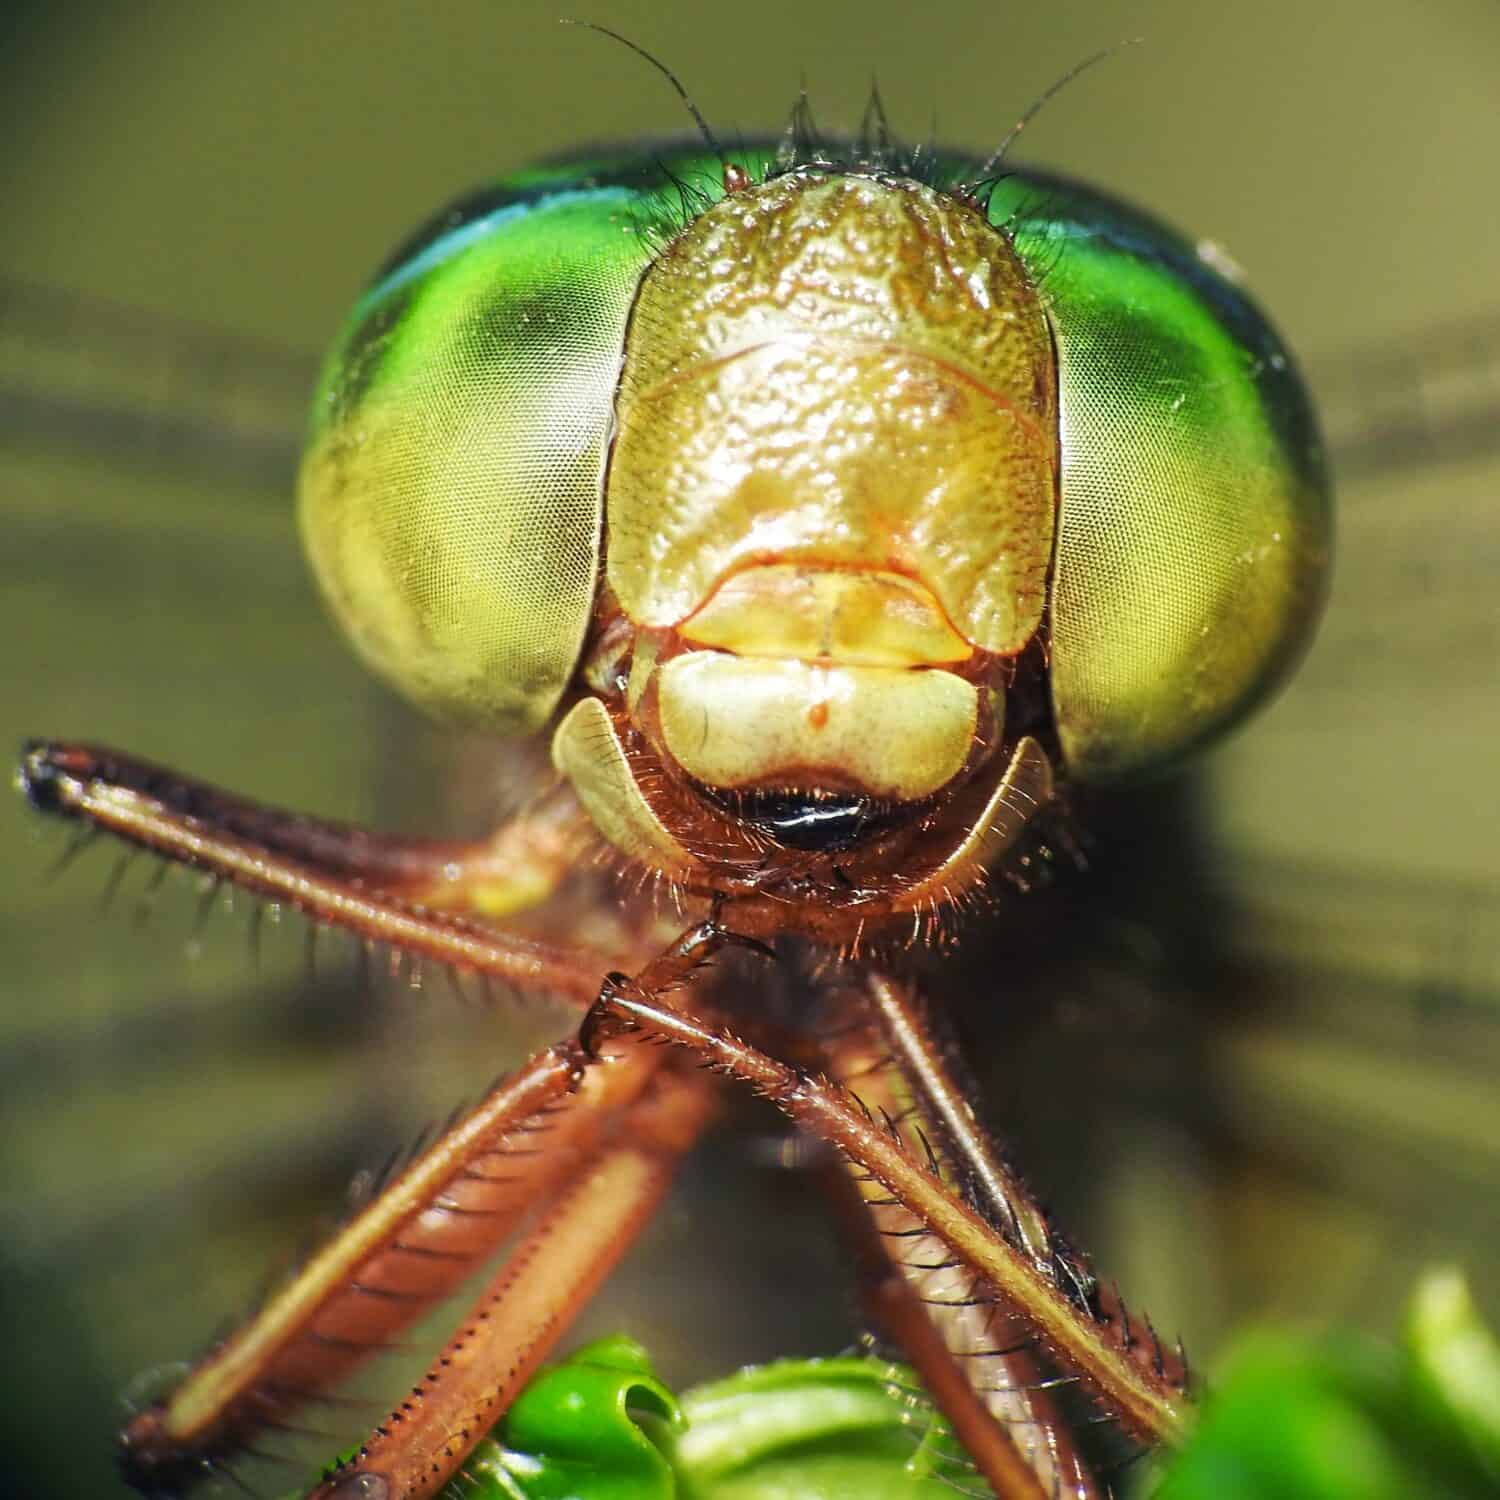 Dragonfly pose smiling. Do they have a mouth structure like that, yes smile sweetly and pose when photographed. Amazing.